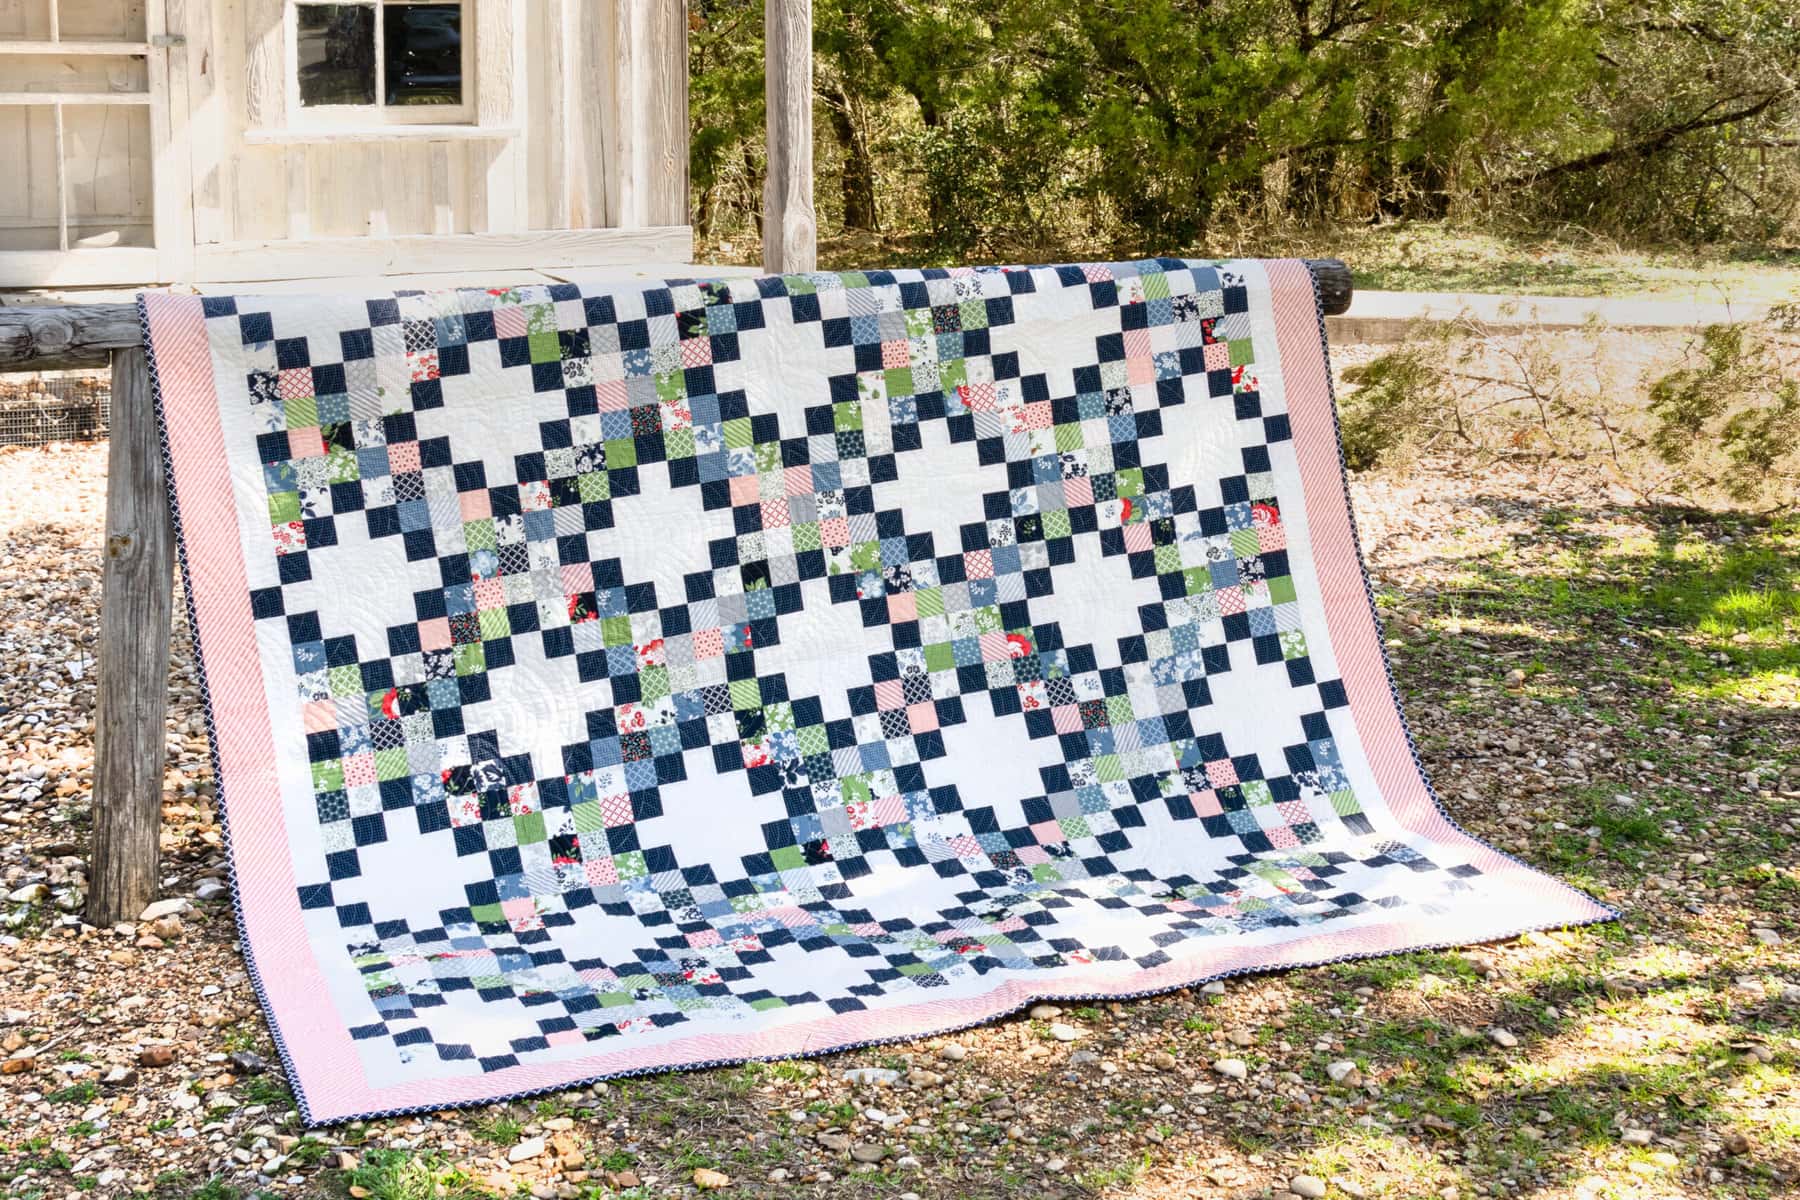 pretty patch quilt made from jelly rolls called nesting quilts